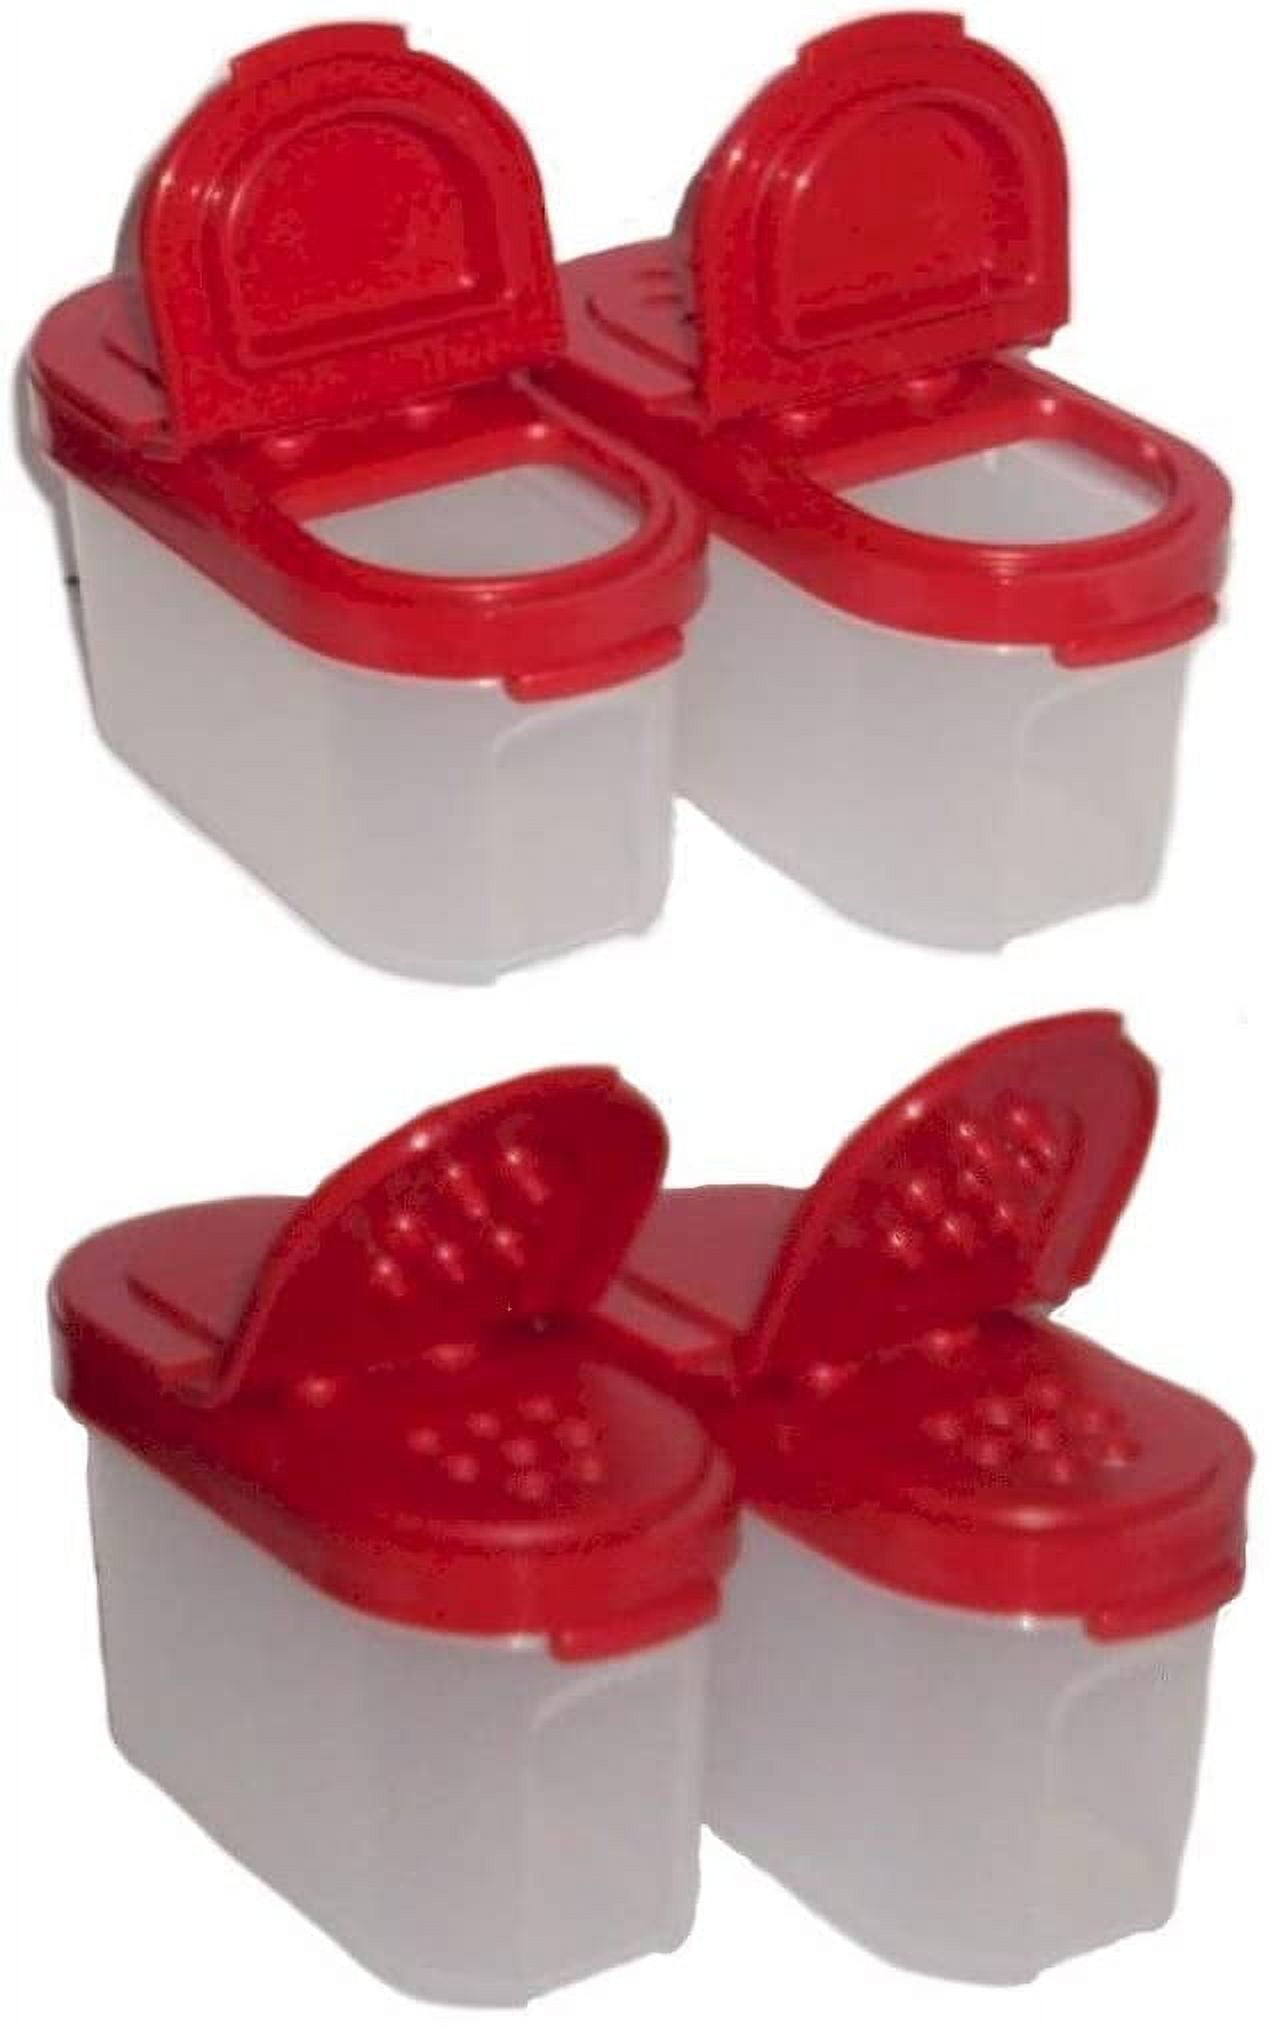 Tupperware Small Spice Containers Set of 4 